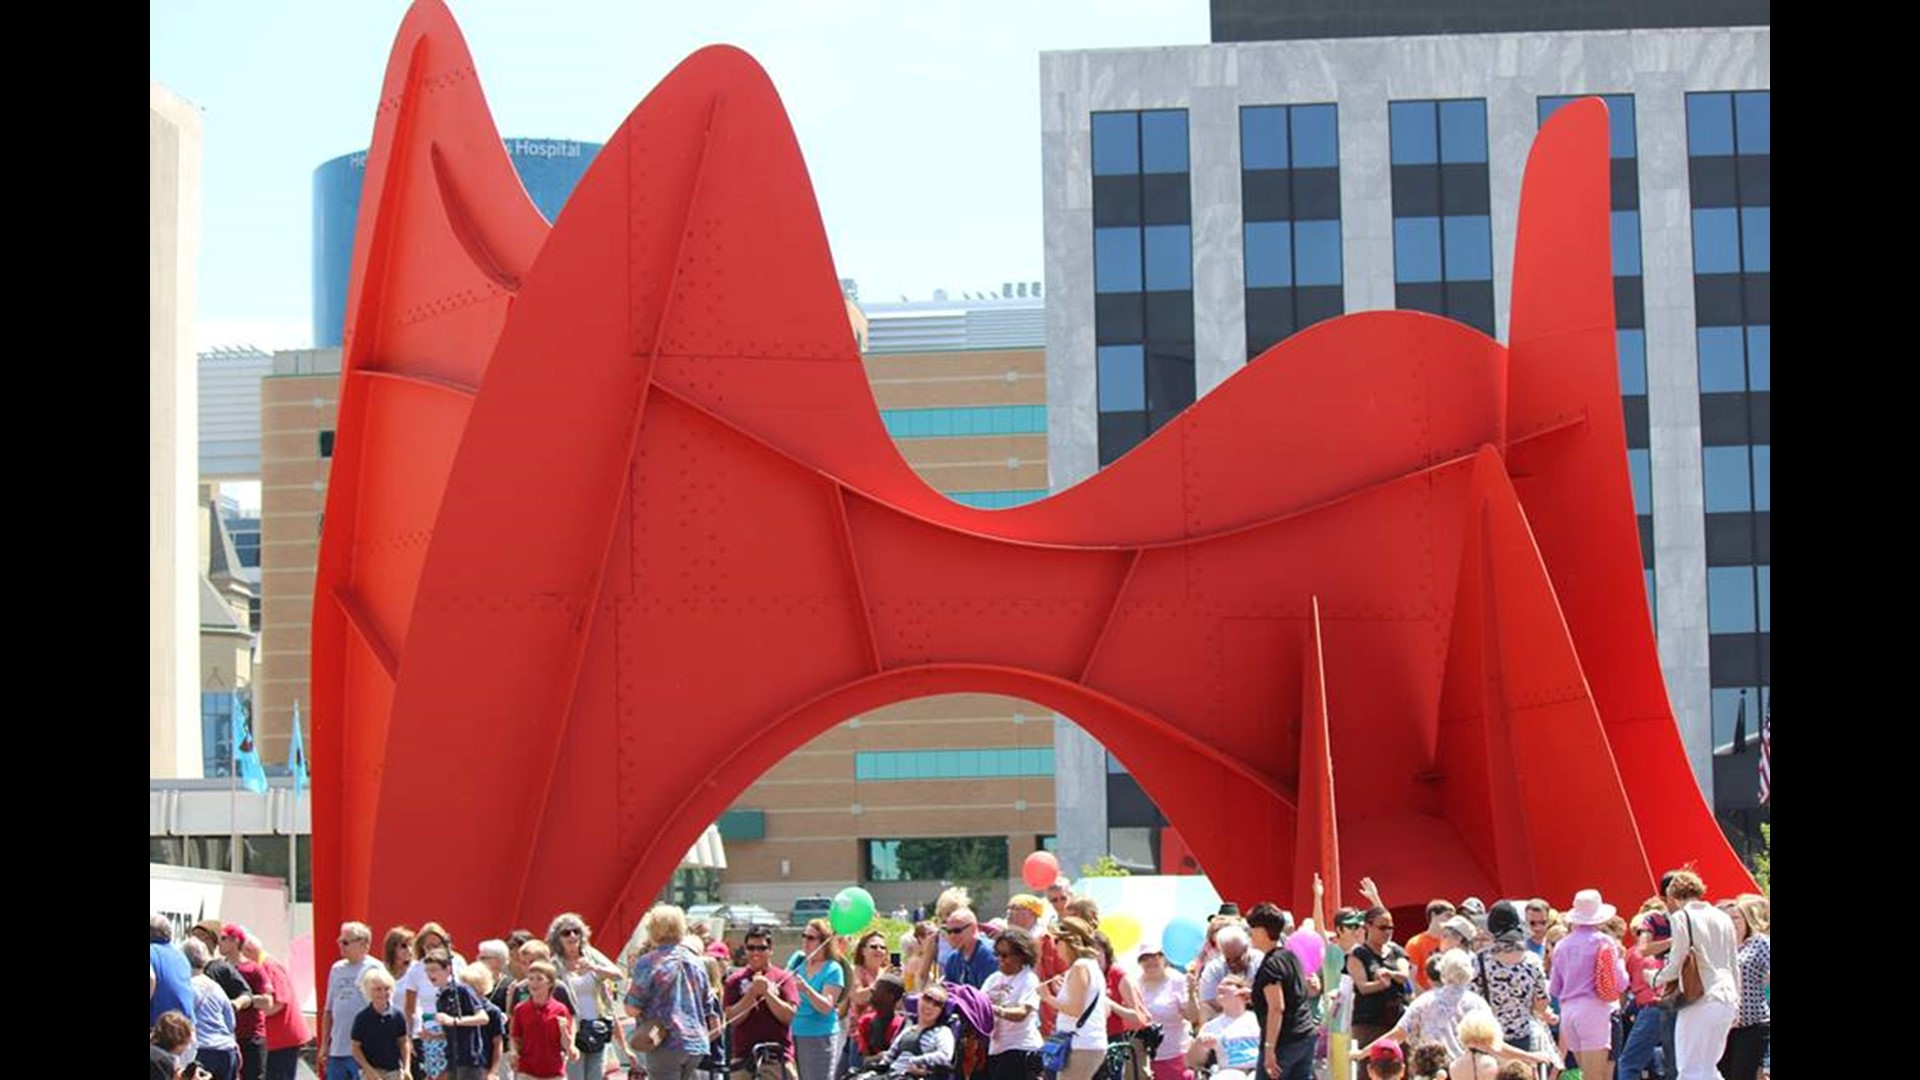 46th annual Festival of the Arts underway in Grand Rapids